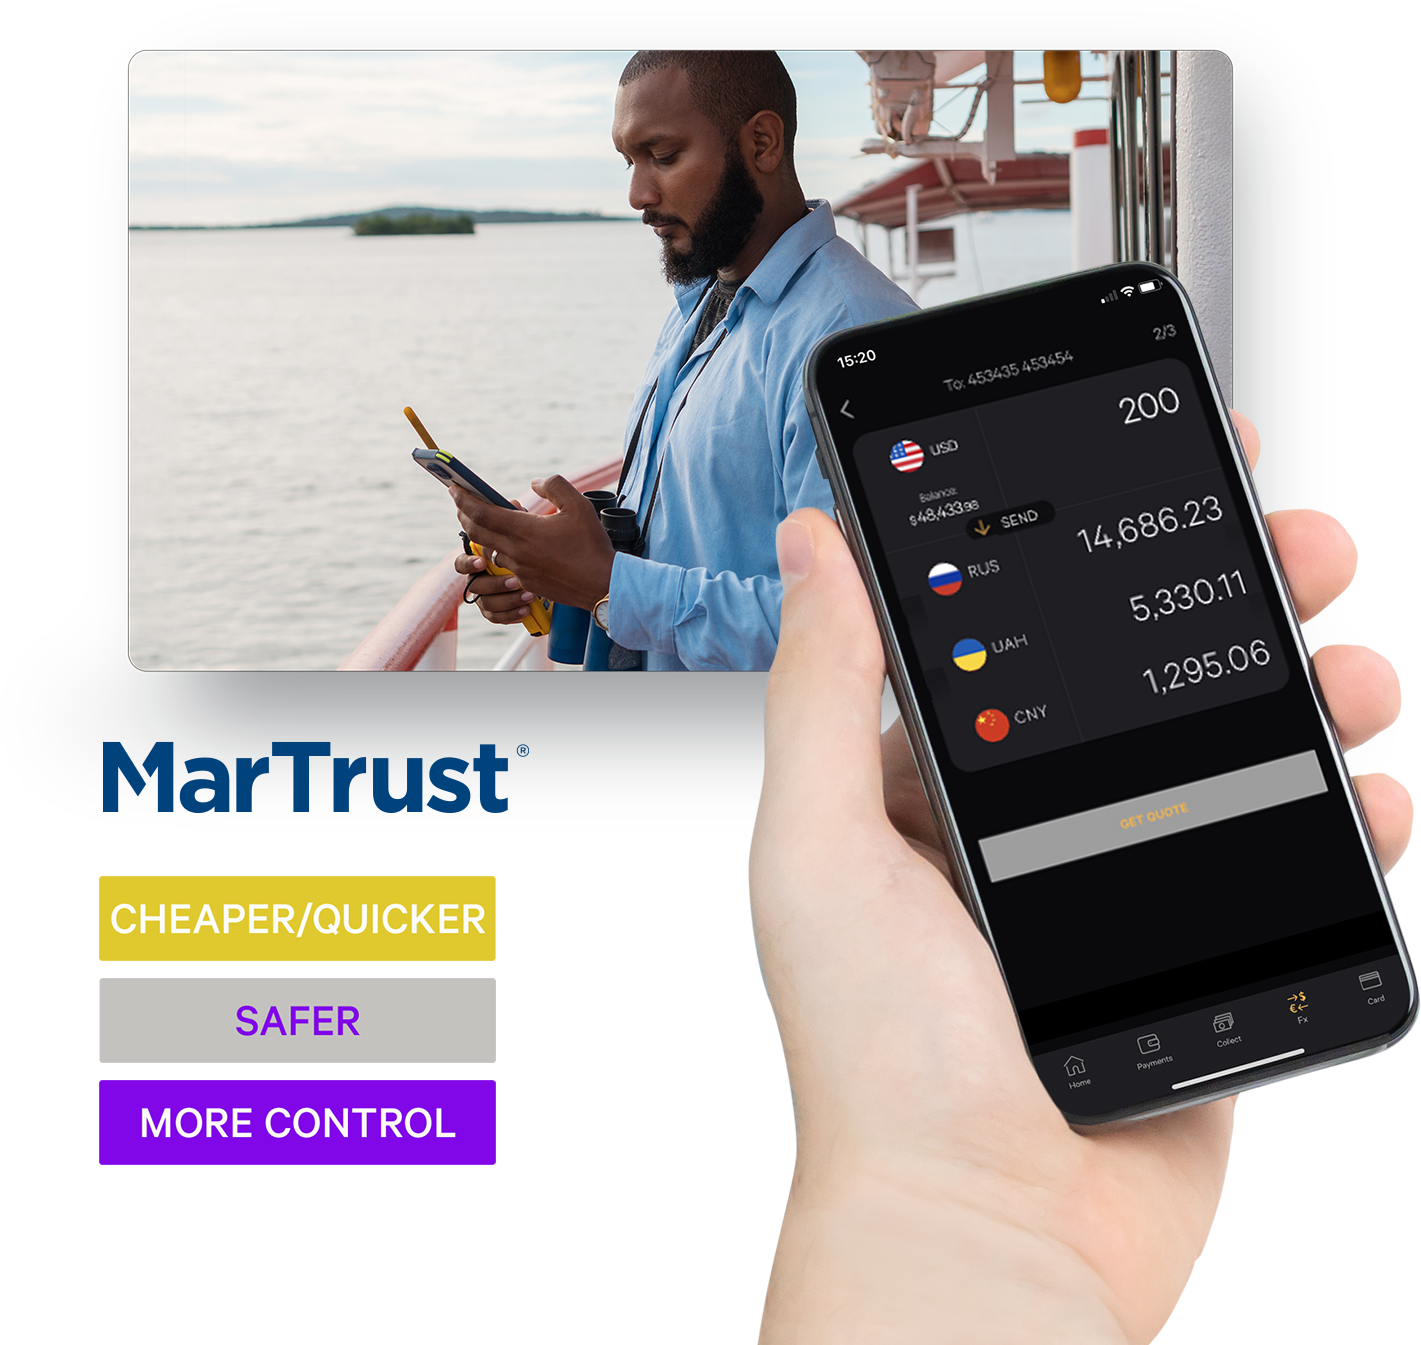 MarTrust E-Wallet maritime payments, crew payments maxe easy